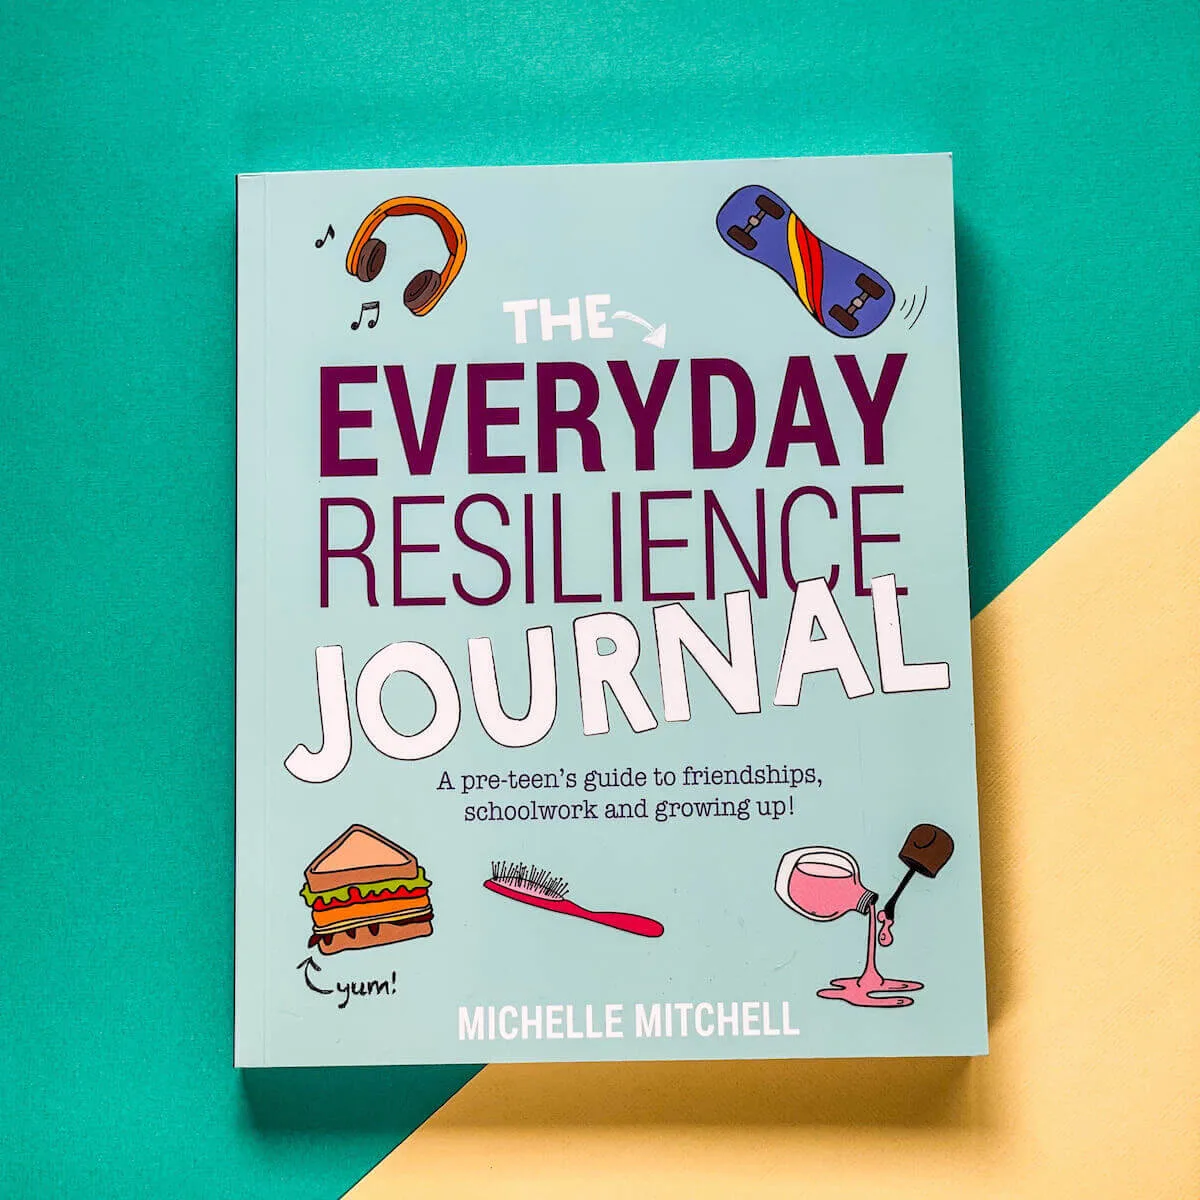 Everyday resilience journal